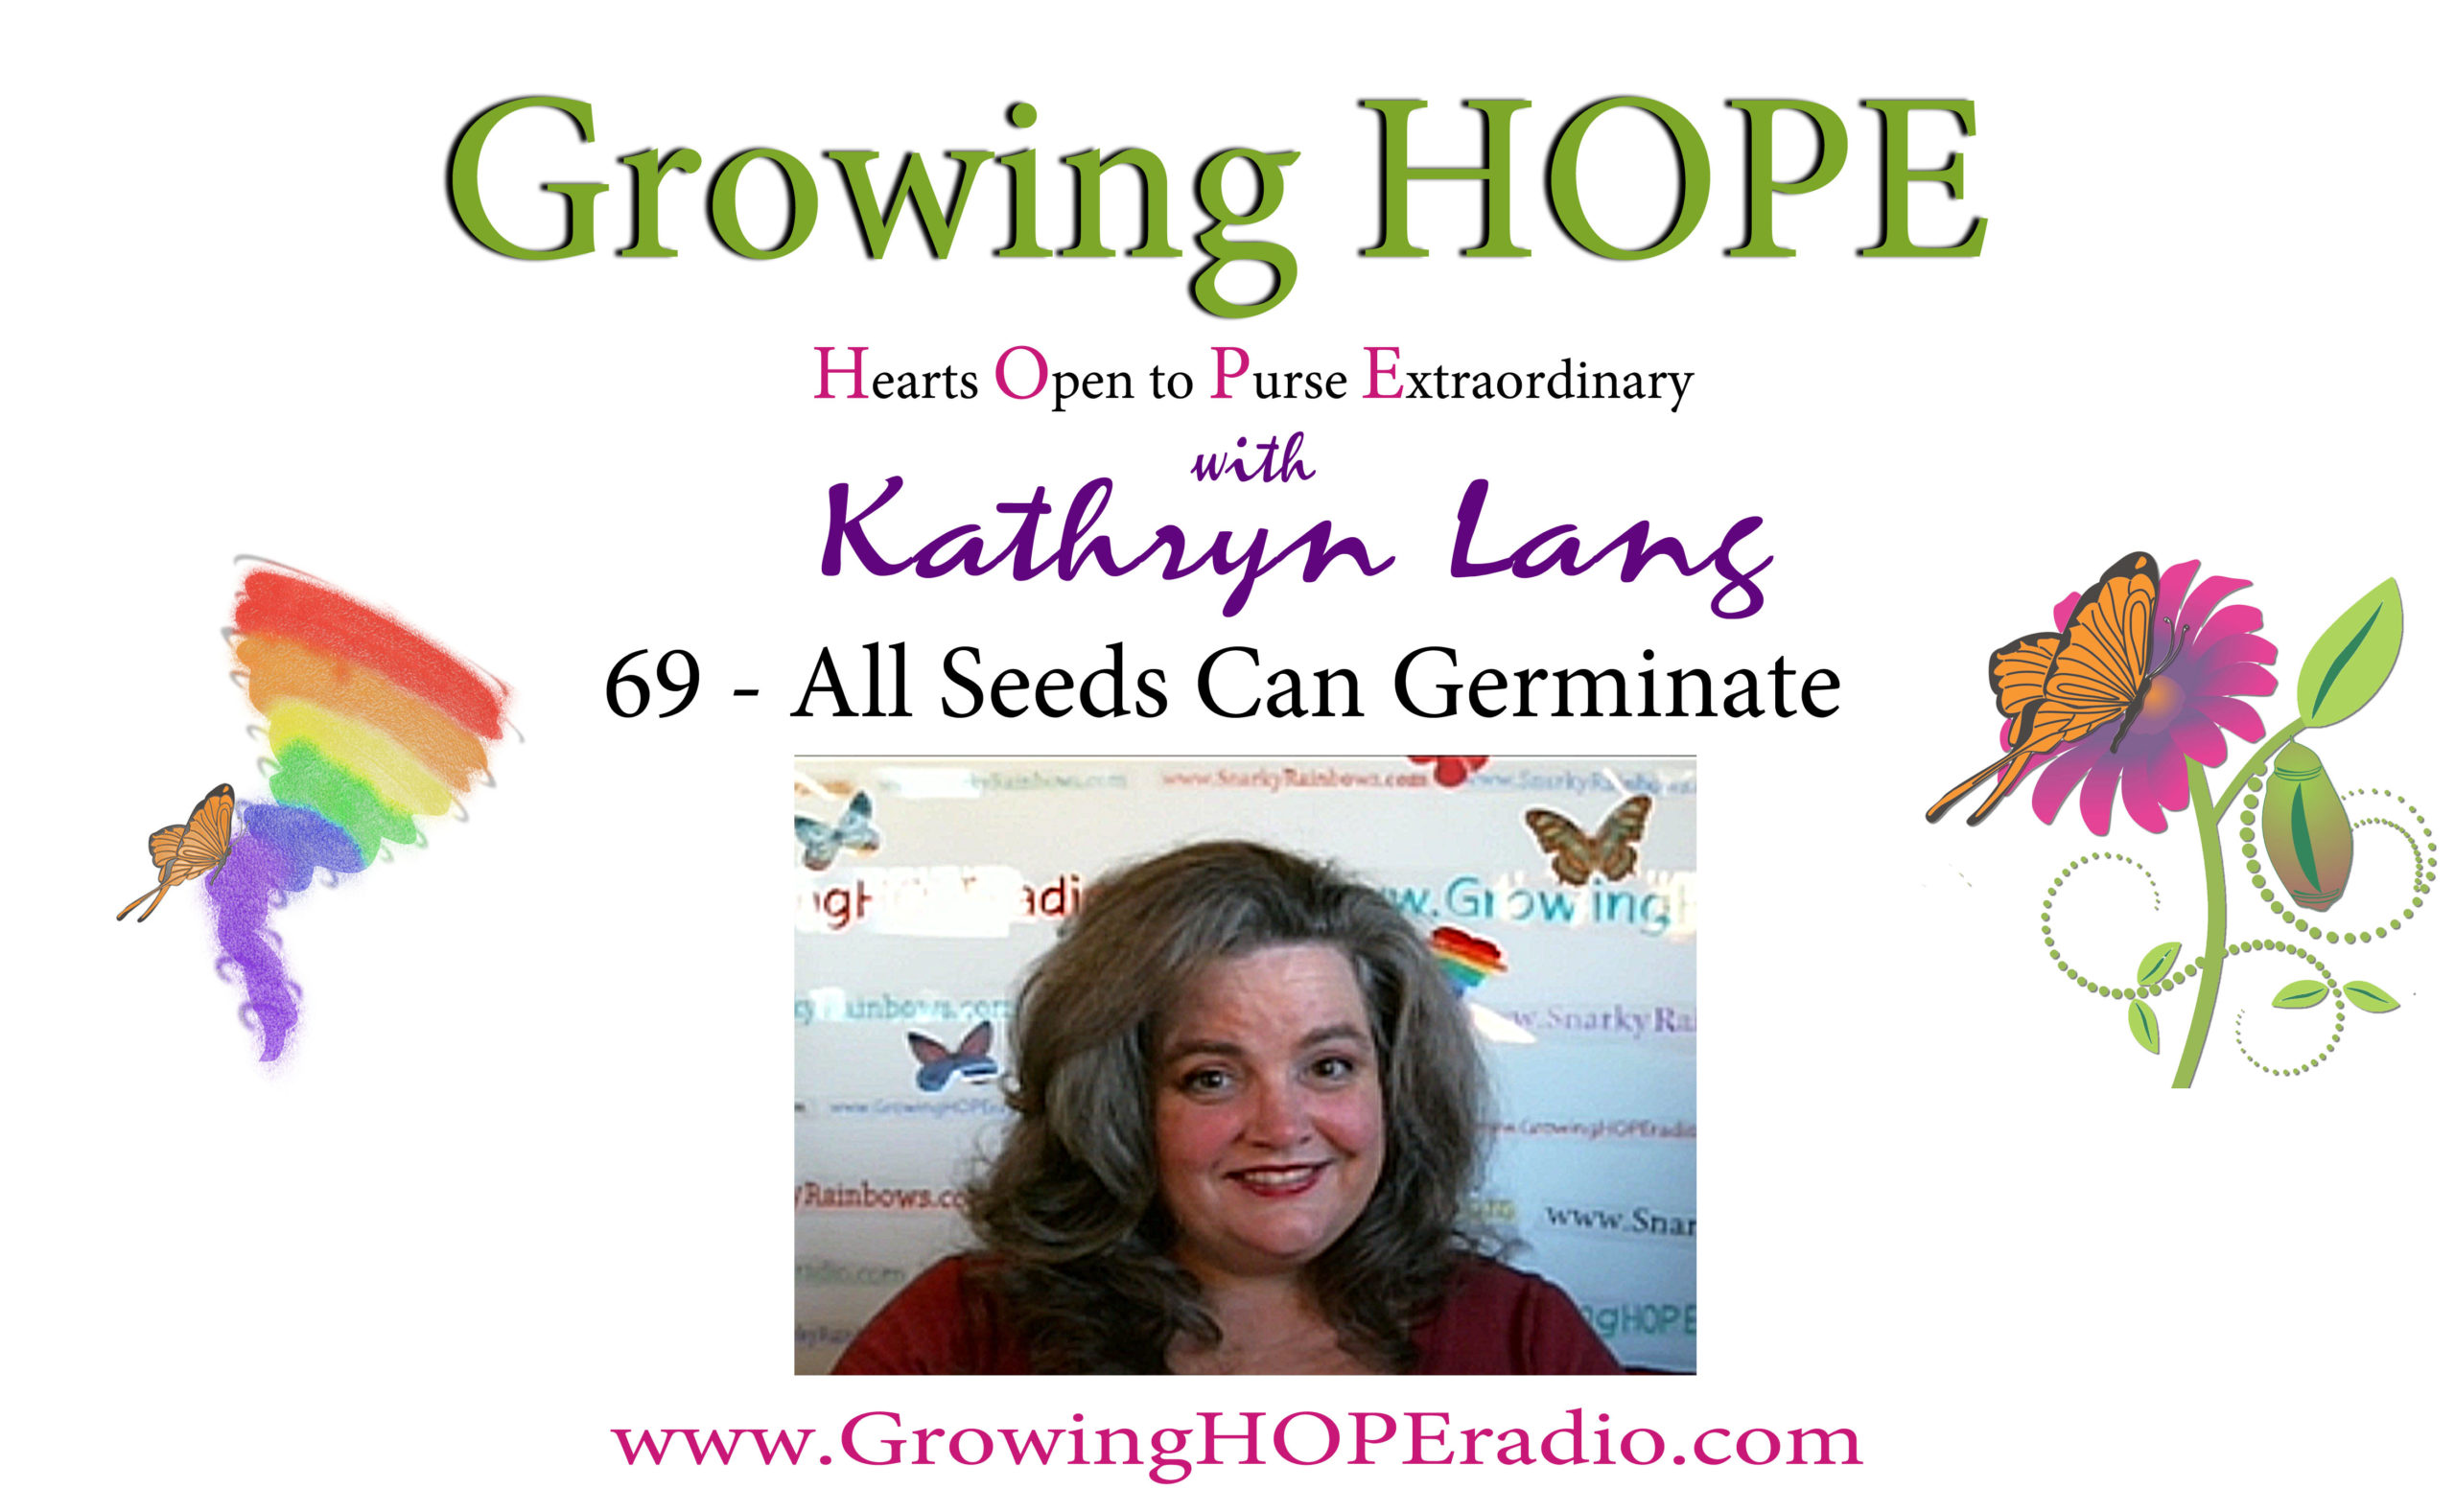 #GrowingHOPE Daily - 69 - All Seeds Can Germinate